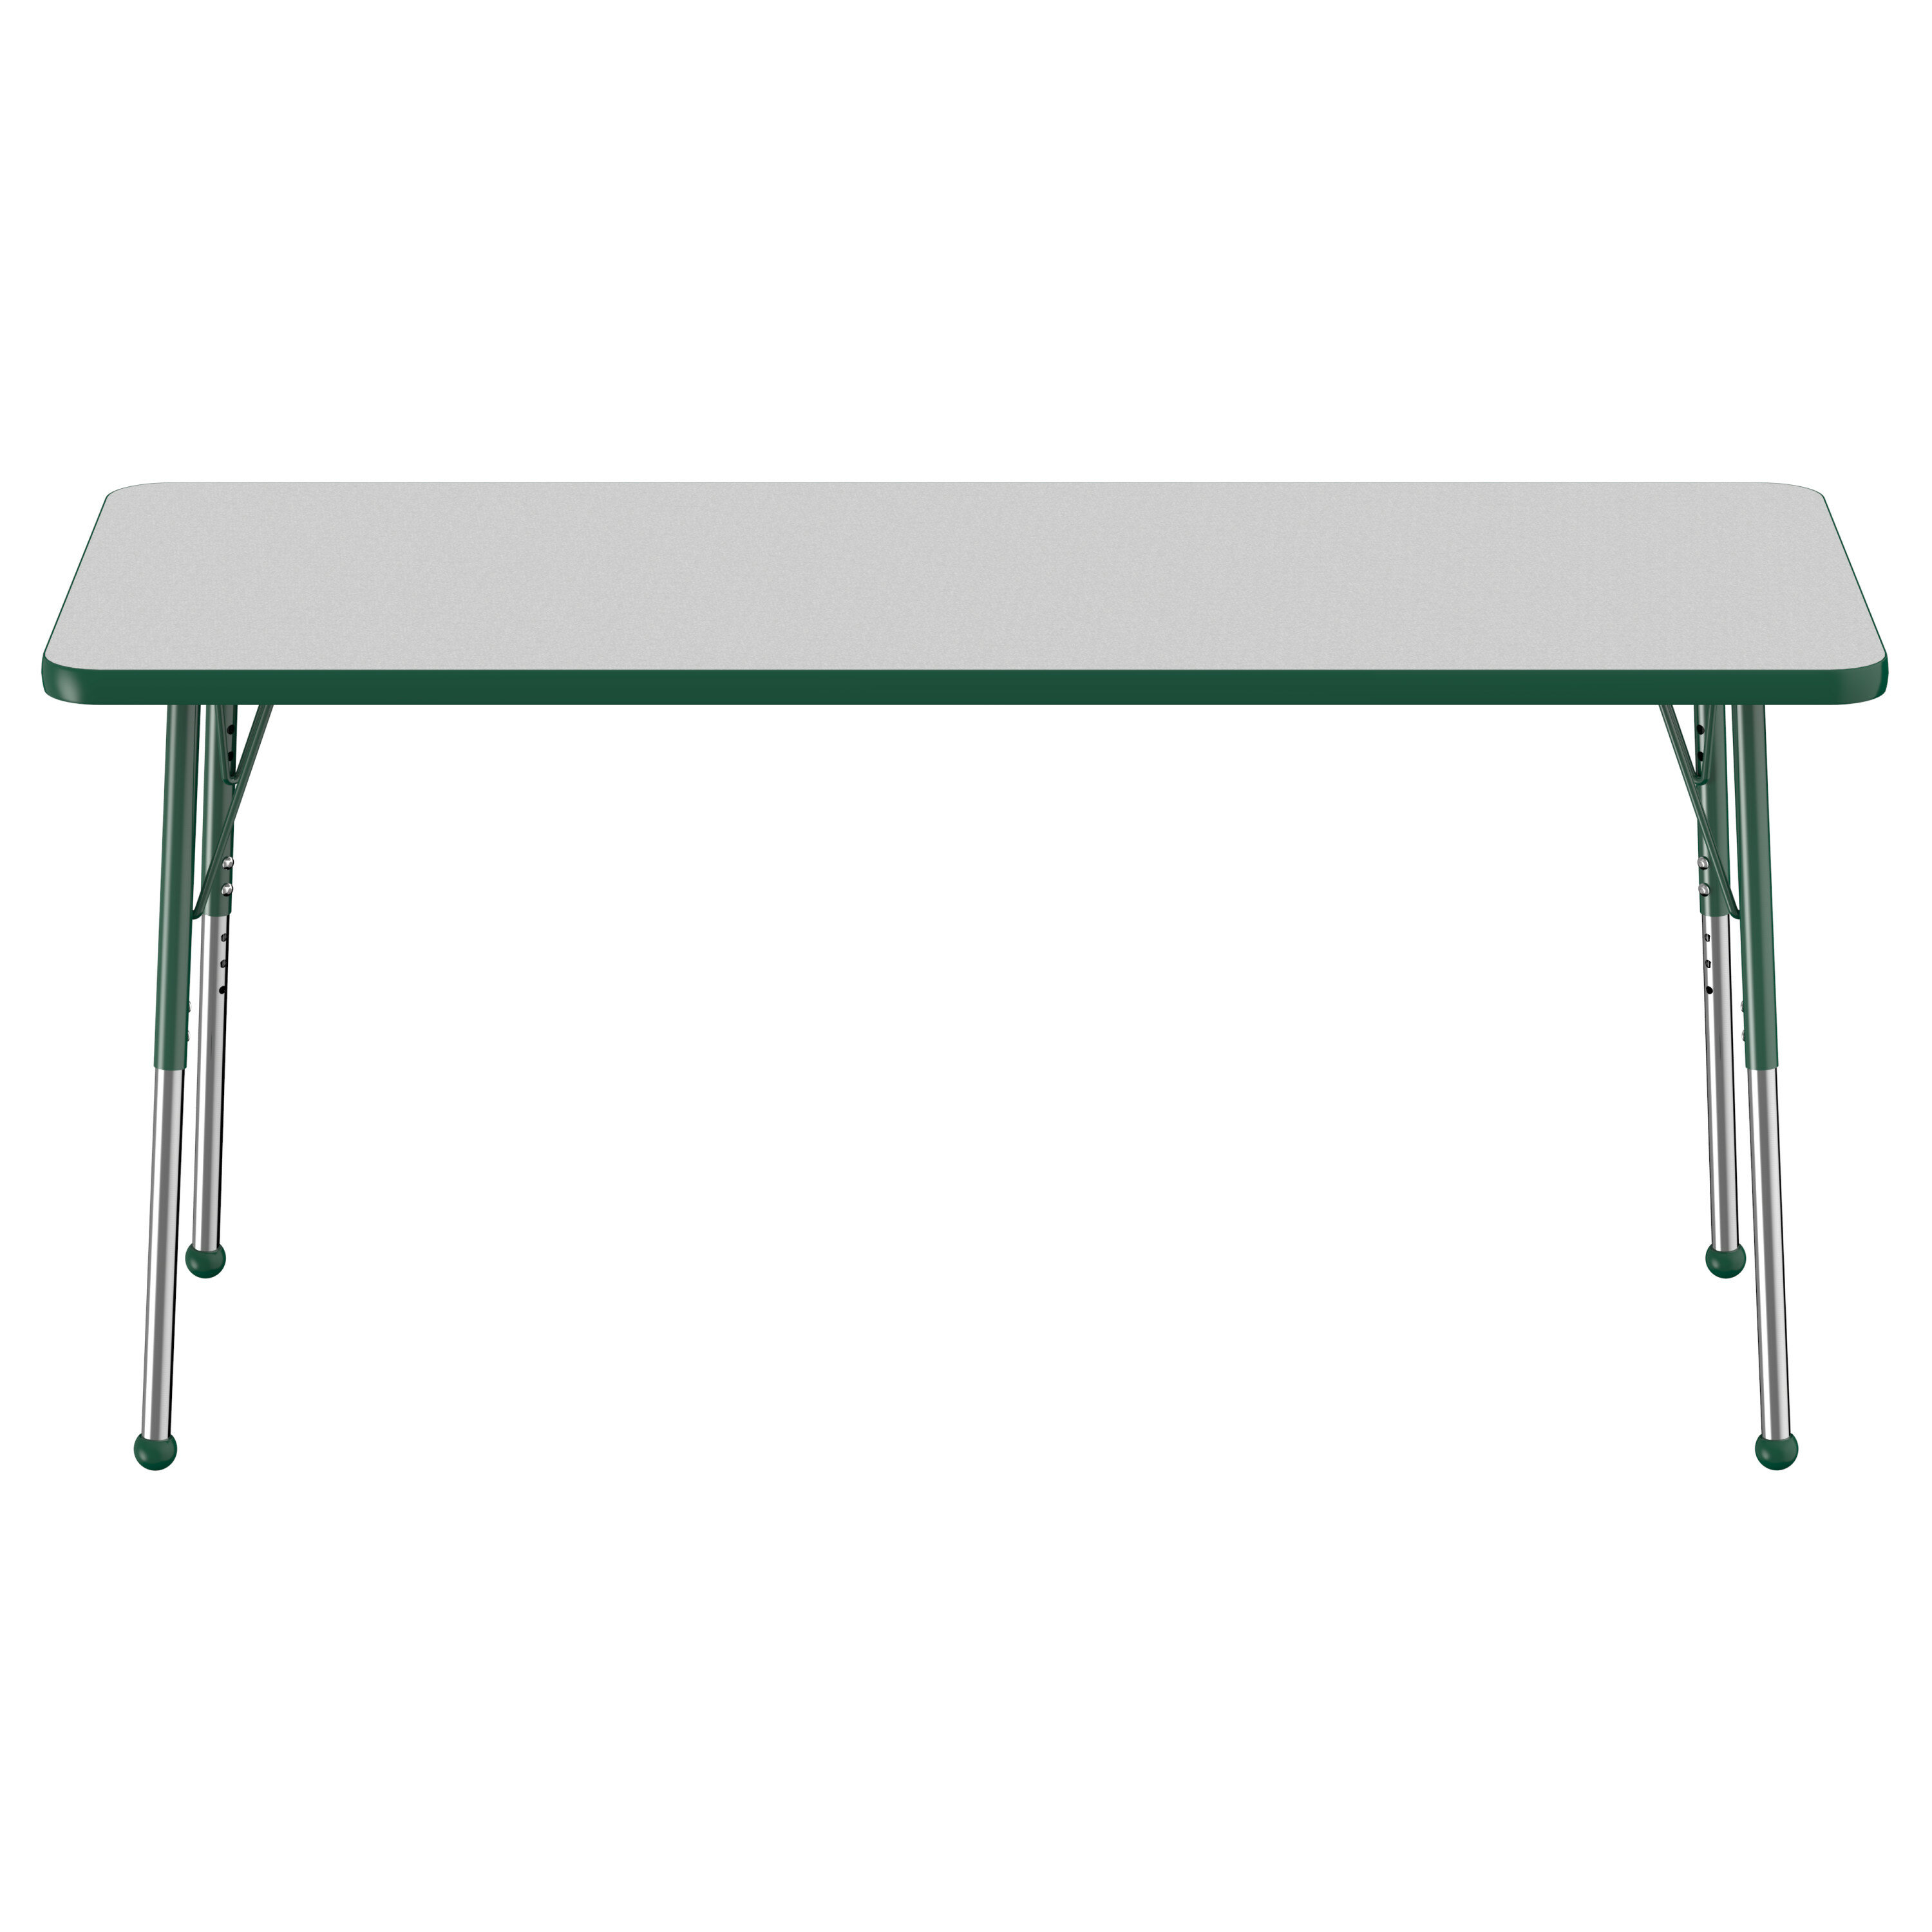 Correll 66 x 60 Horseshoe 19 - 29 Blue Finish Adjustable Height  High-Pressure Top Activity Table